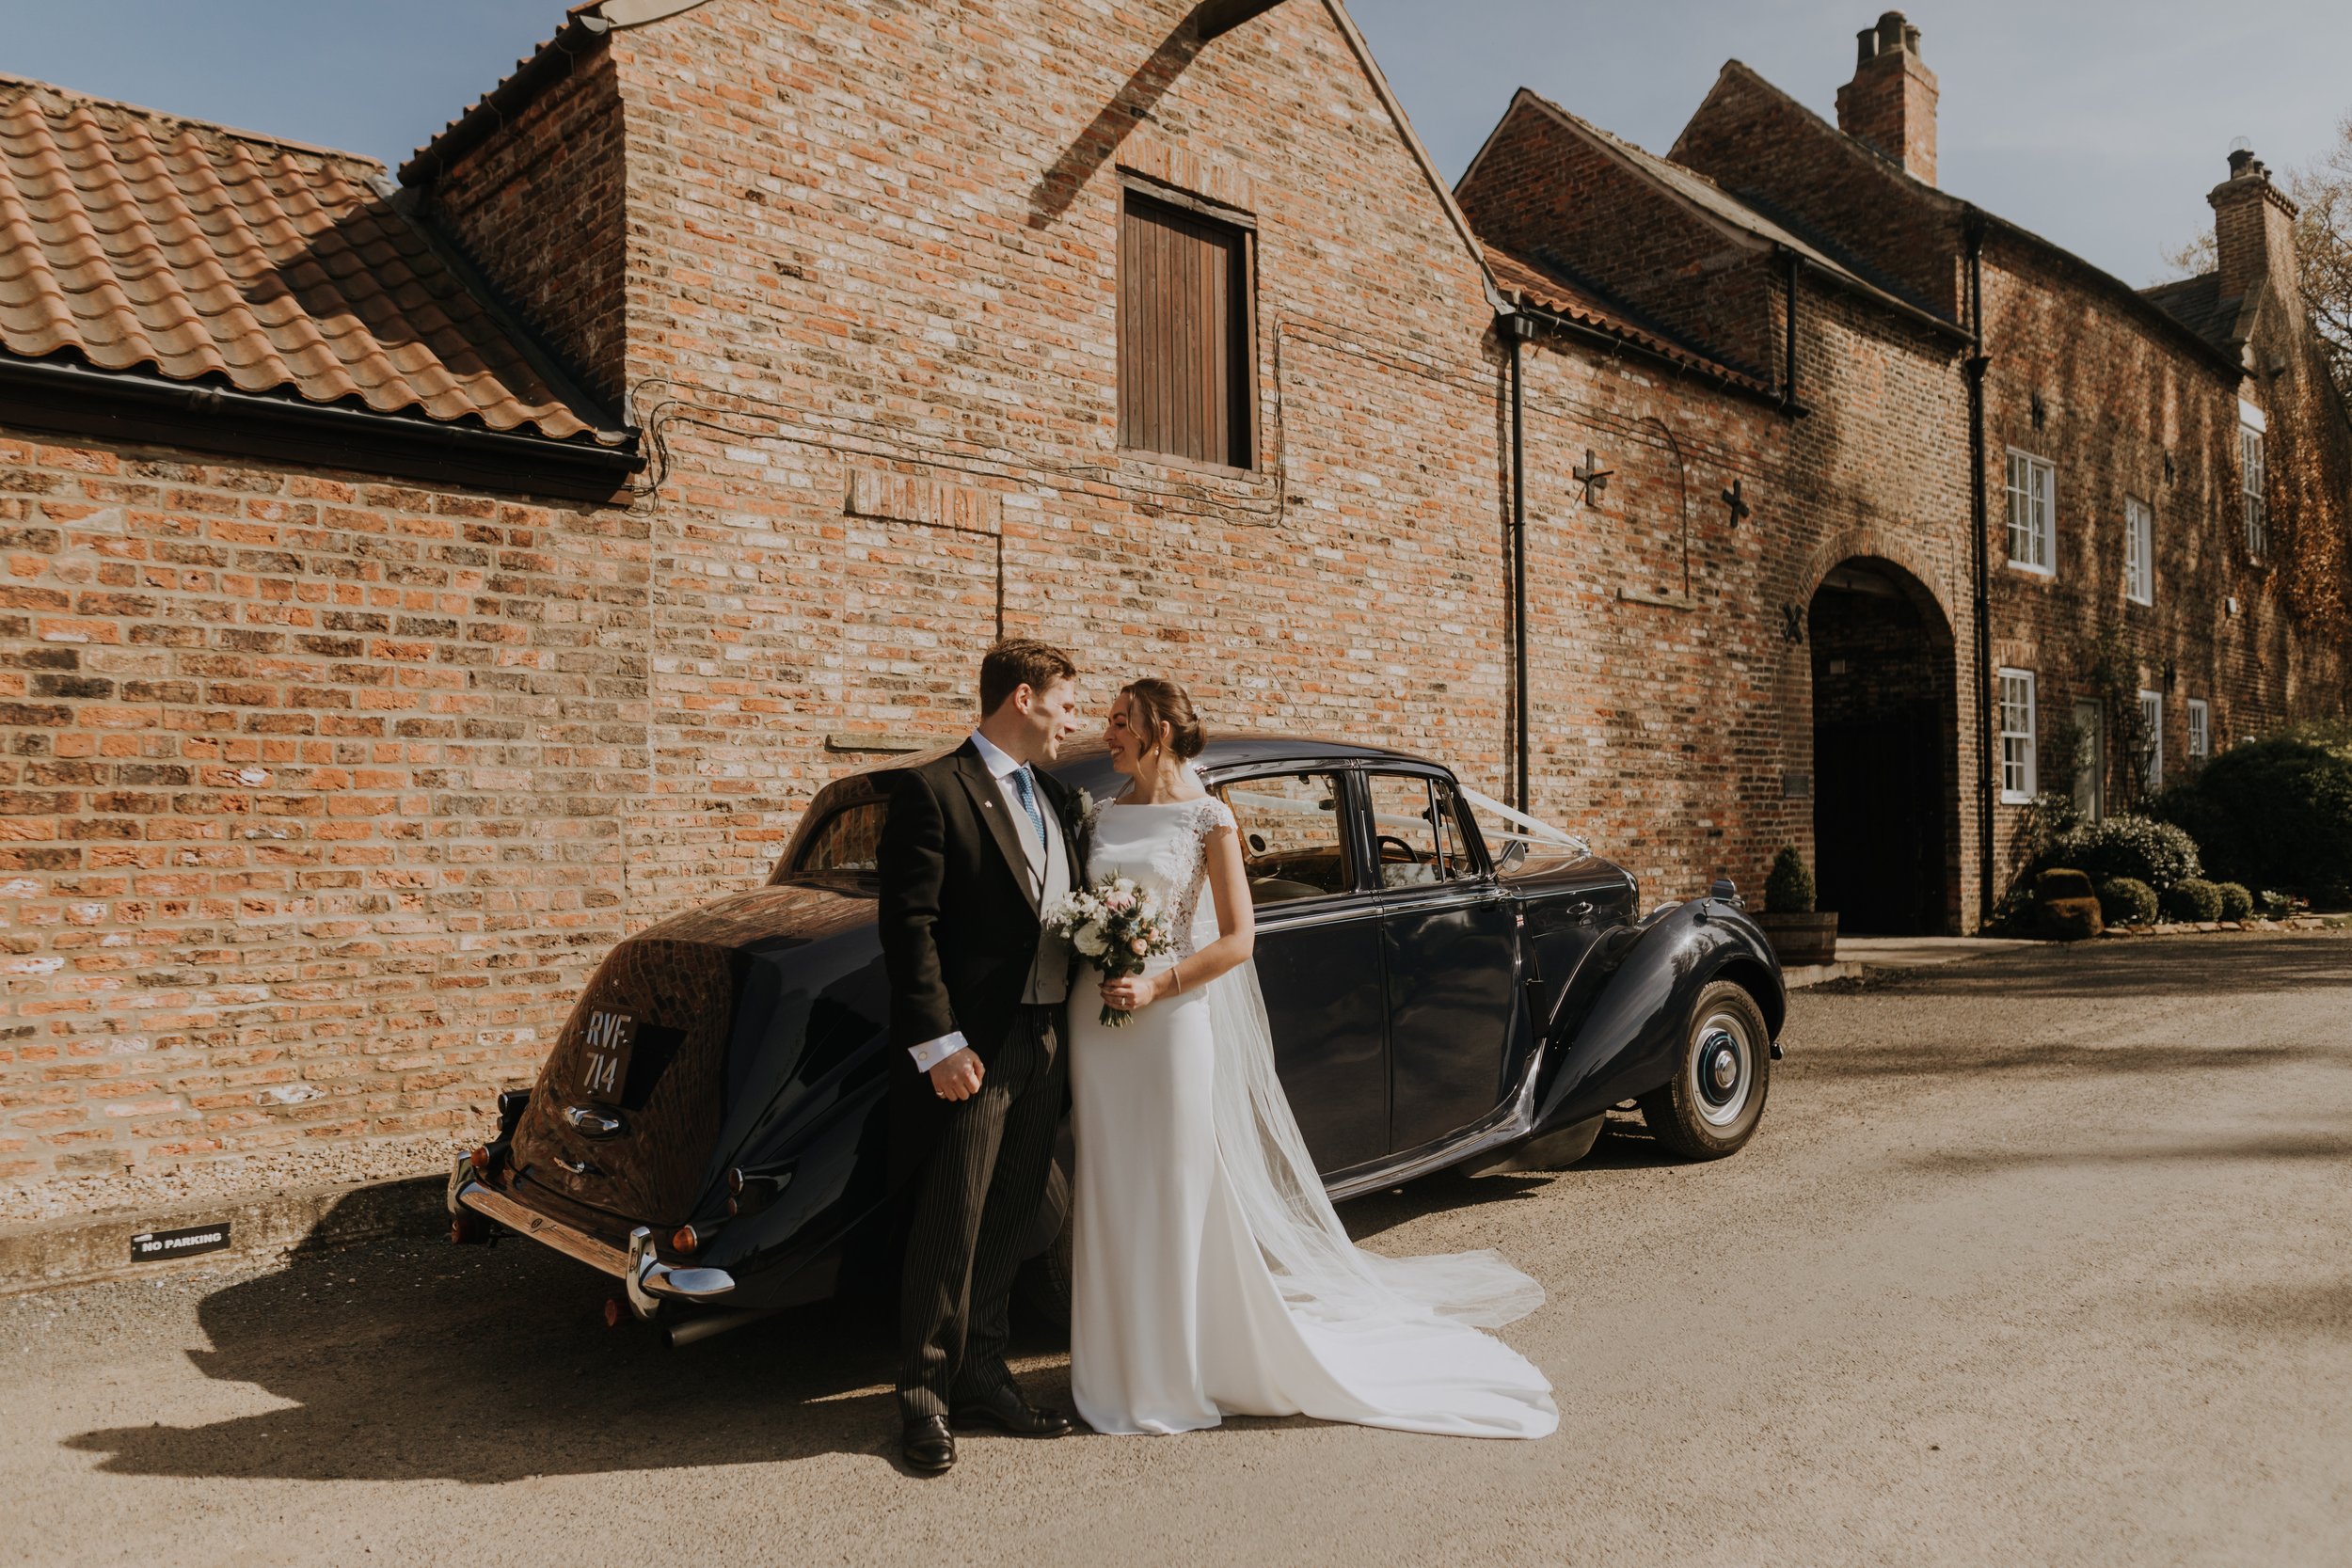 Bride and Groom arrive in style at The Normans wedding venue. Photo by Louise Anna Photography.jpg